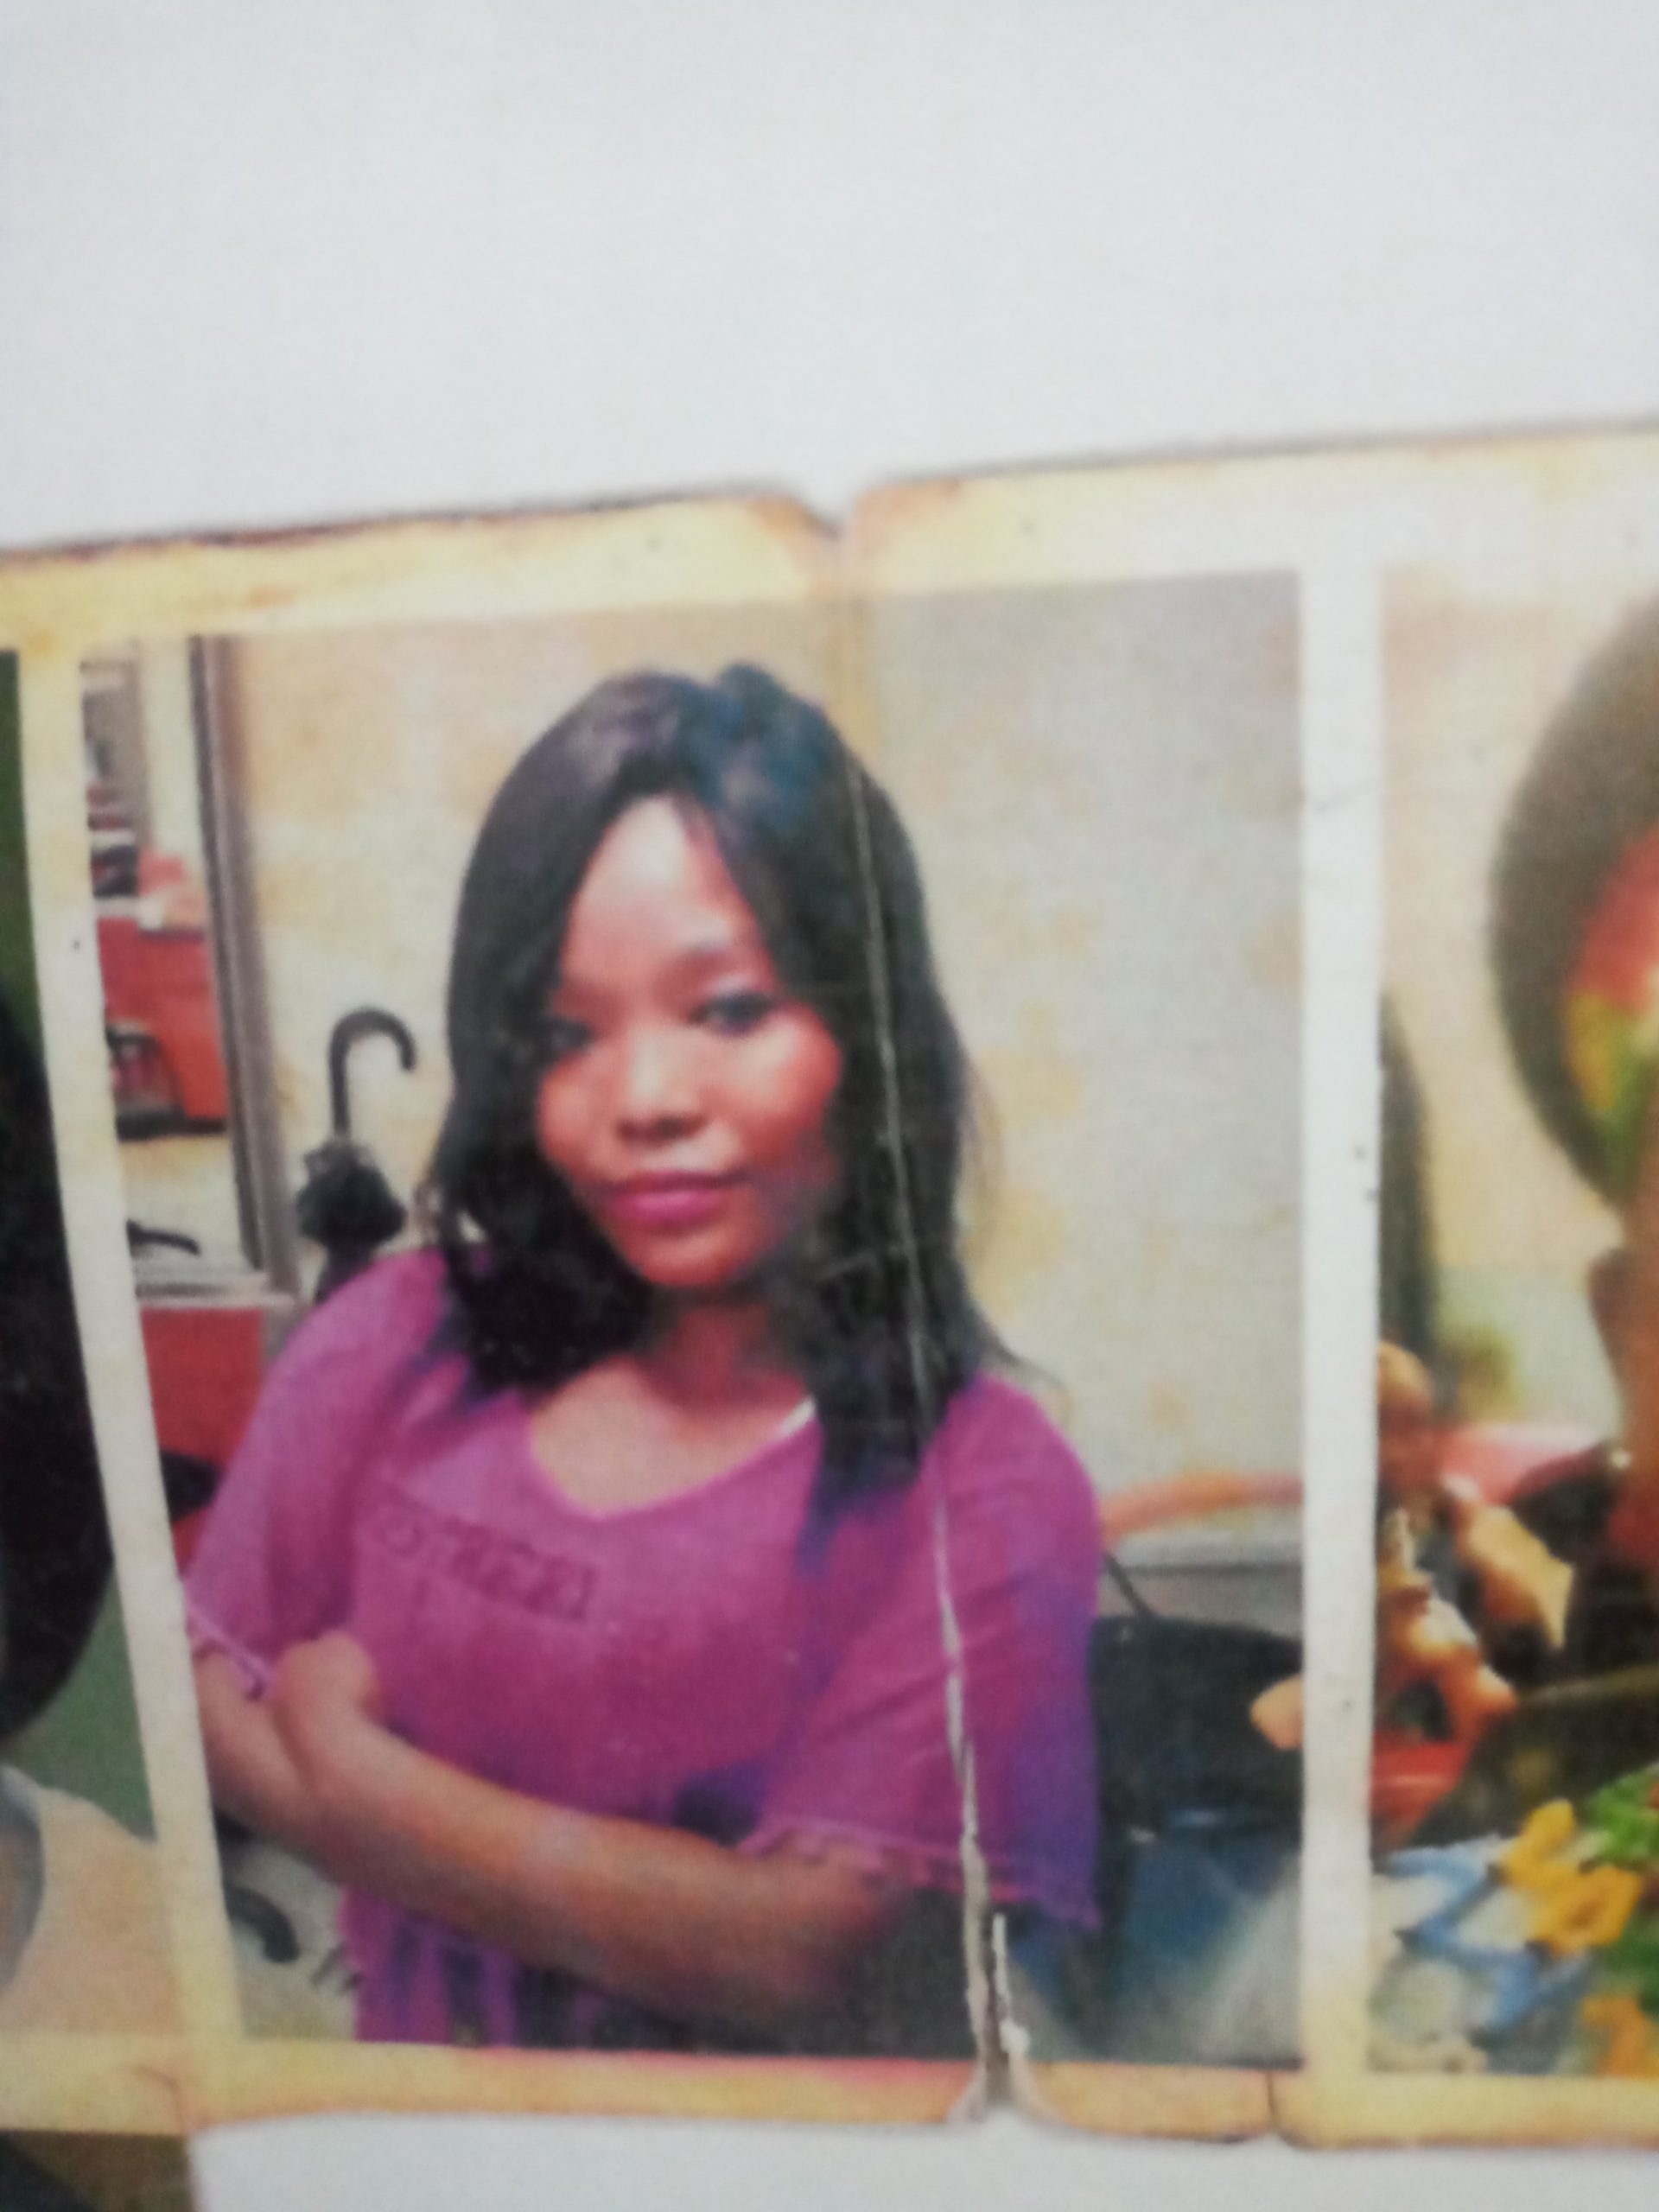 Missing person sought by Empangeni police